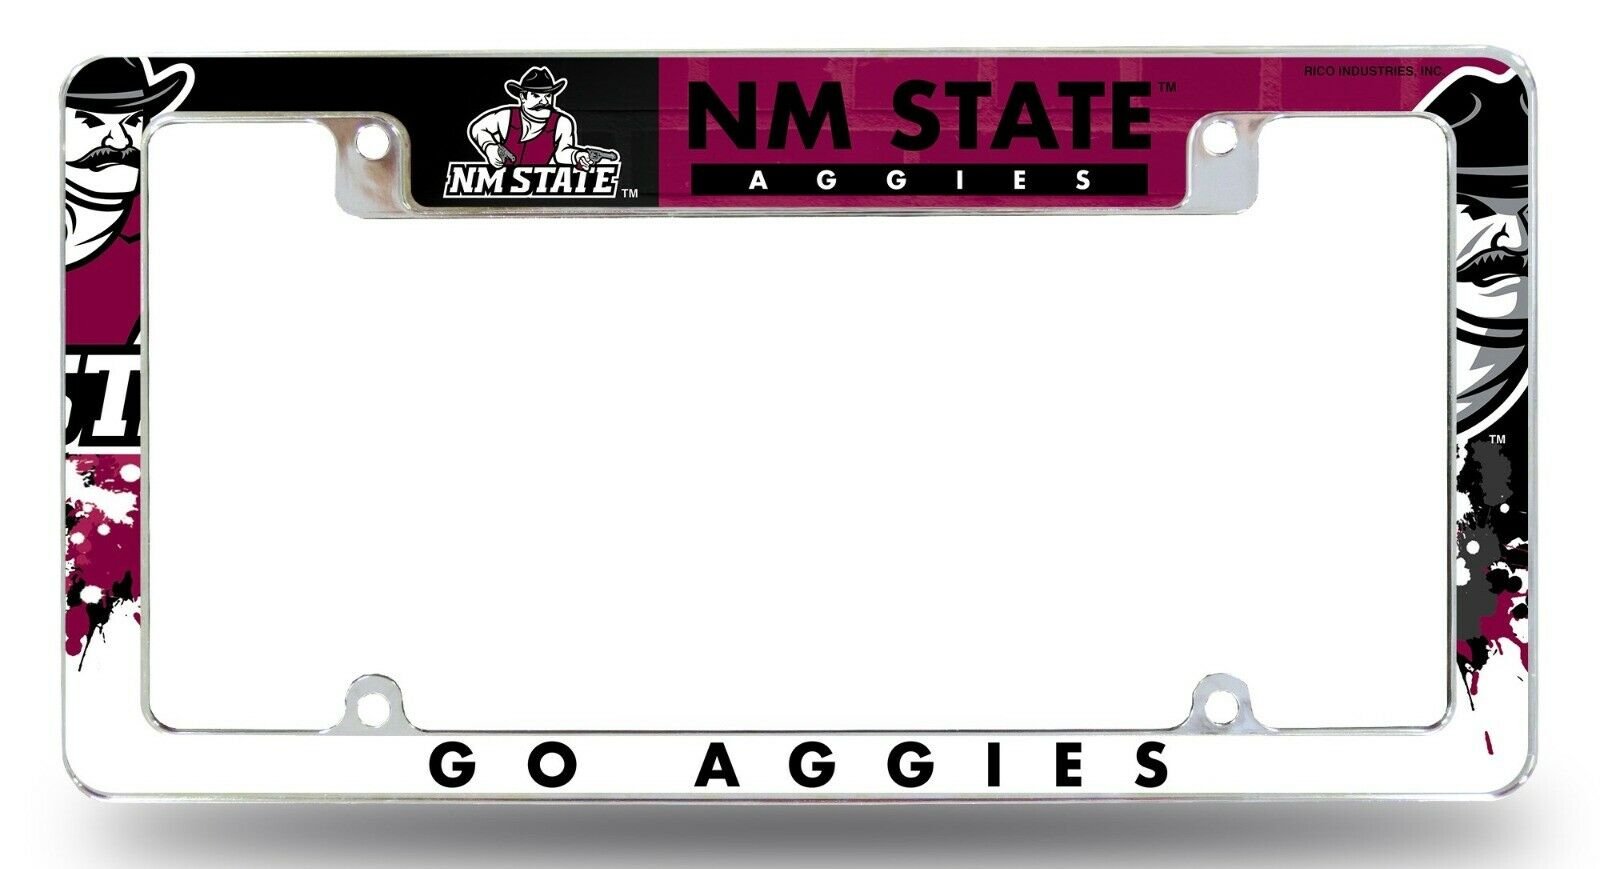 New Mexico State Aggies EZ Chrome Frame Metal License Plate Tag Cover University